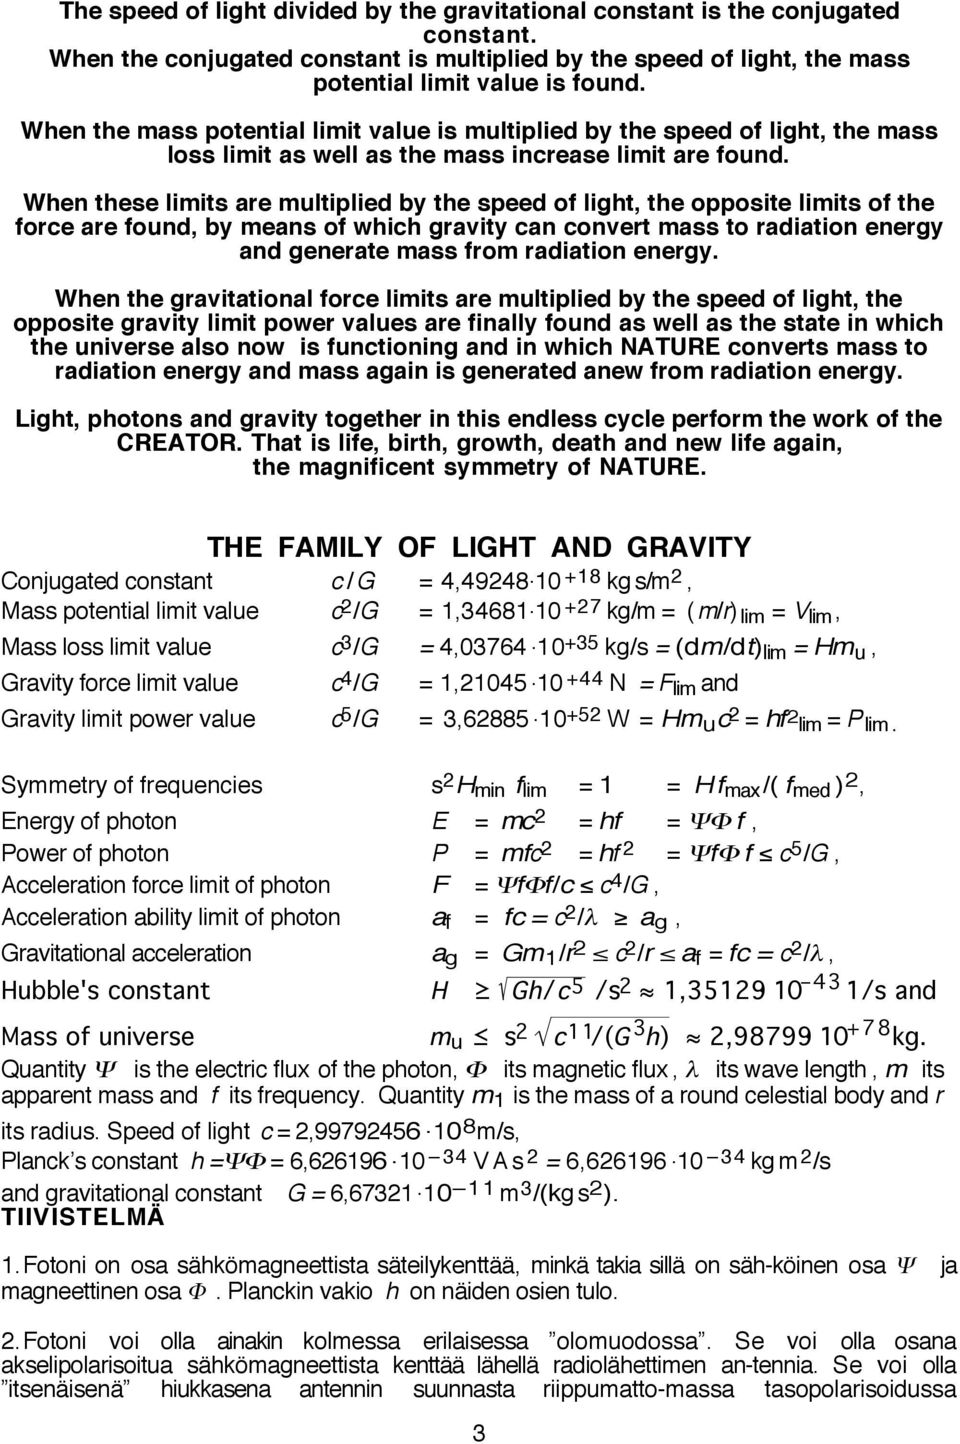 When these limits are multiplied by the speed of light, the opposite limits of the force are found, by means of which gravity can convert mass to radiation energy and generate mass from radiation